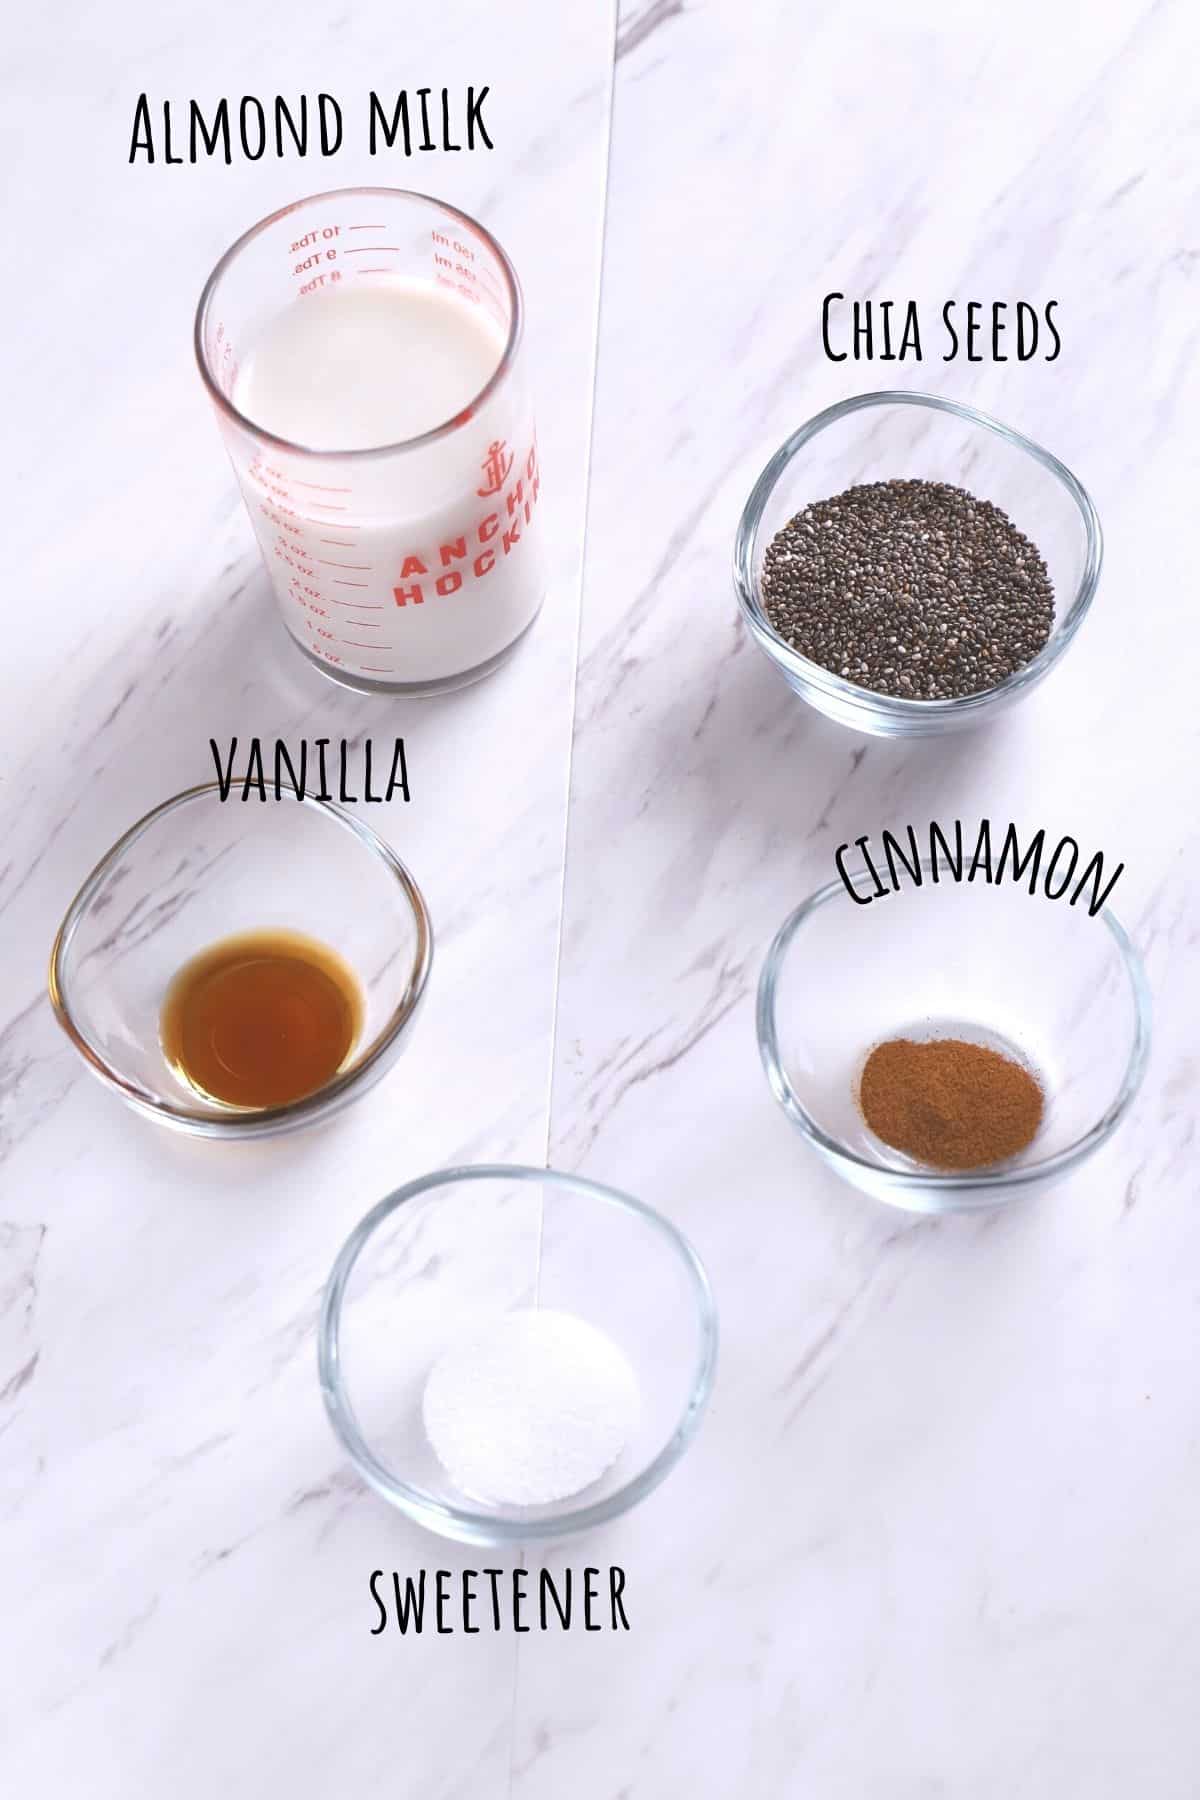 Chia pudding ingredients on a white surface.